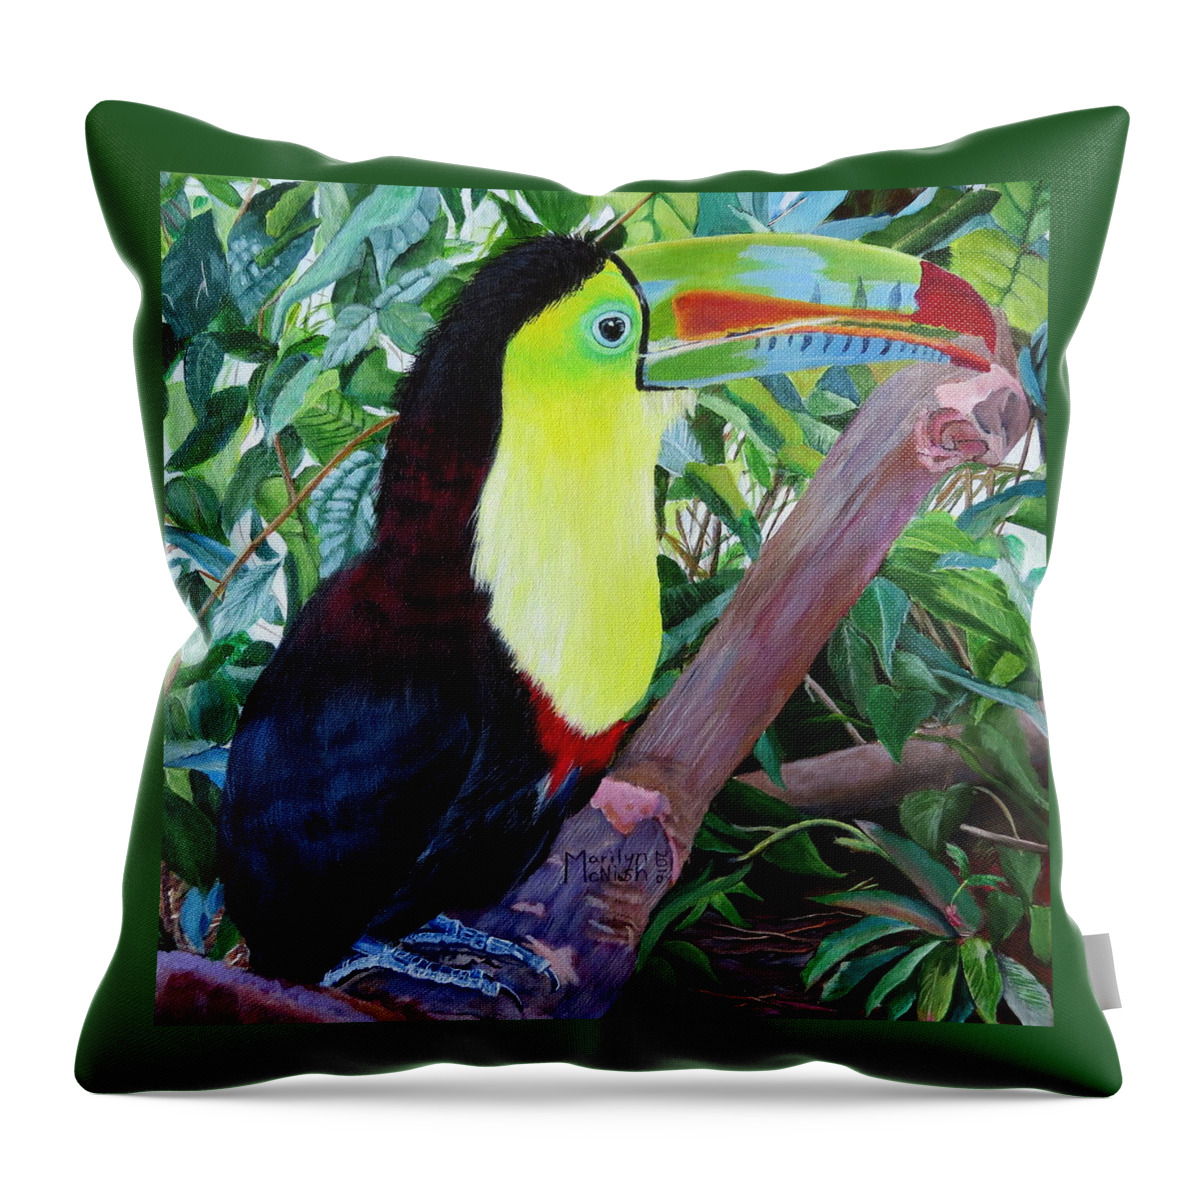 Keel-billed Toucan Throw Pillow featuring the painting Toucan Portrait 2 by Marilyn McNish